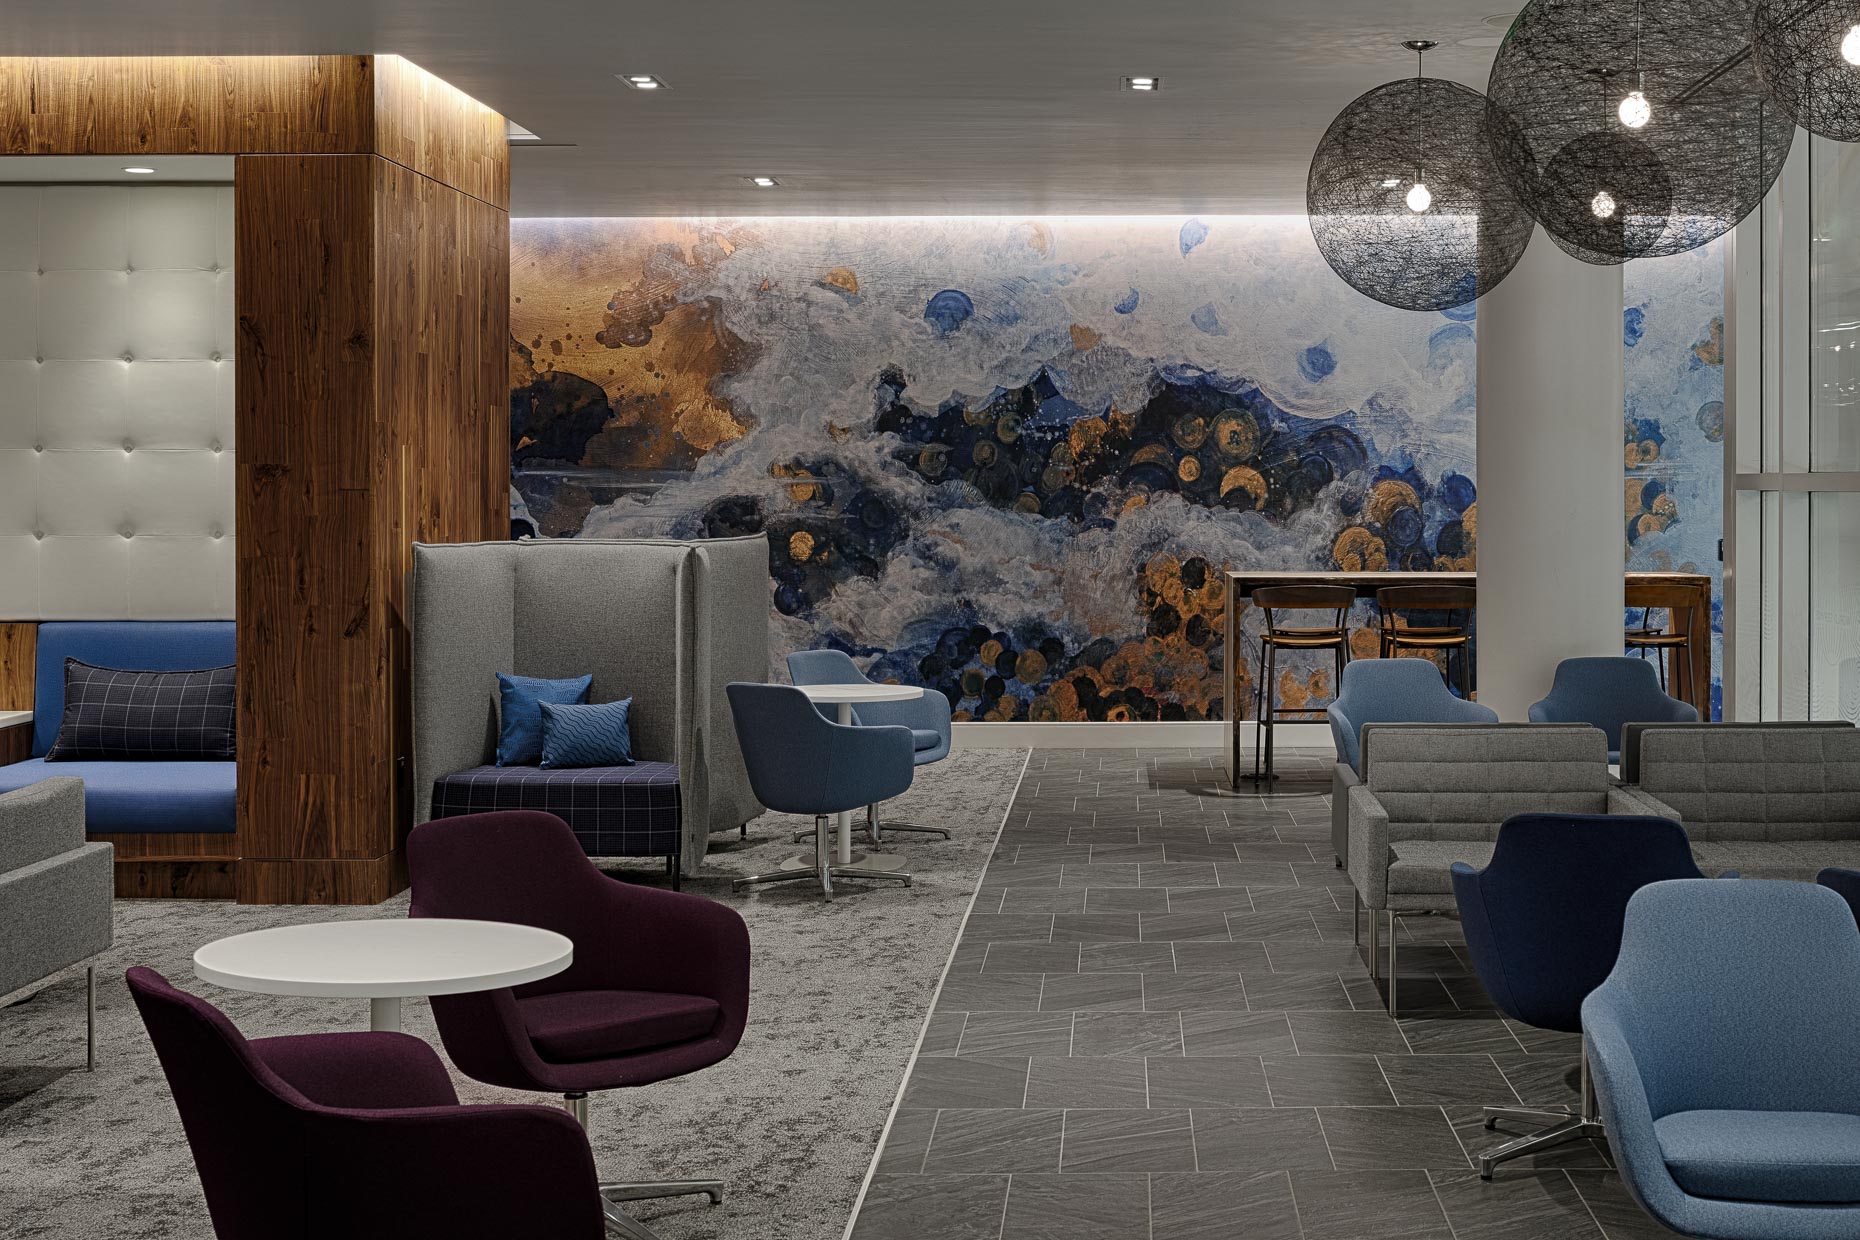 Charlotte Douglas International Airport AMEX Centurion Lounge for American Express photographed by Brad Feinknopf based in Columbus, Ohio